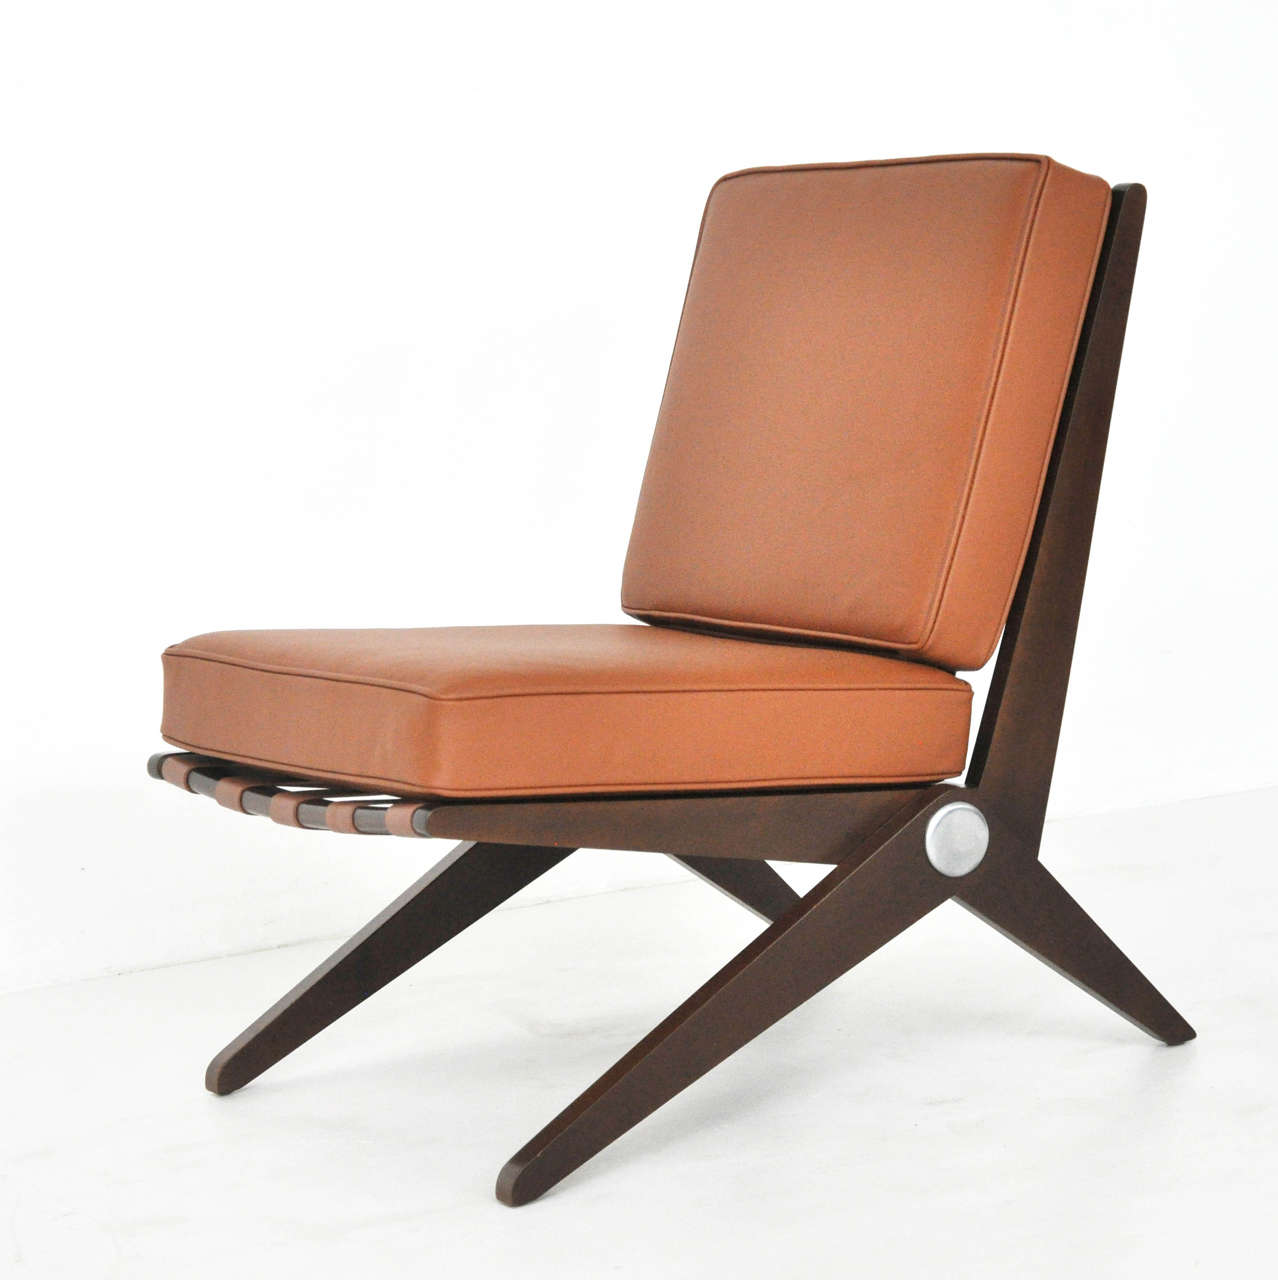 Scissor chair designed by Pierre Jeanneret for Knoll.  New leather straps and cushions over refinished base.  Fully restored.